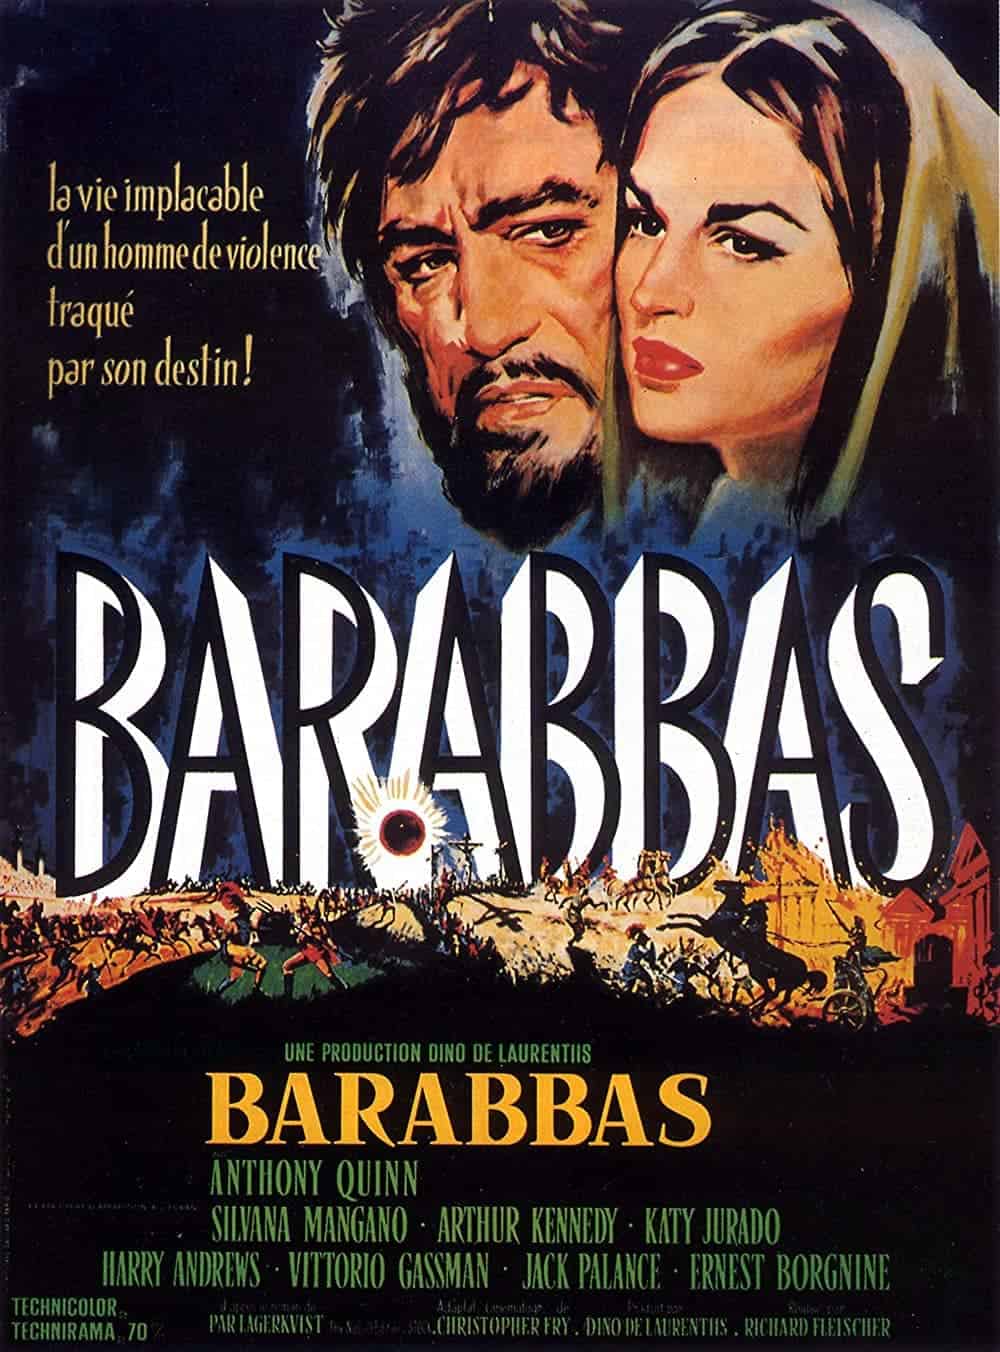 Barabbas (1961) Best Movies About Rome to Watch and Re-Watch